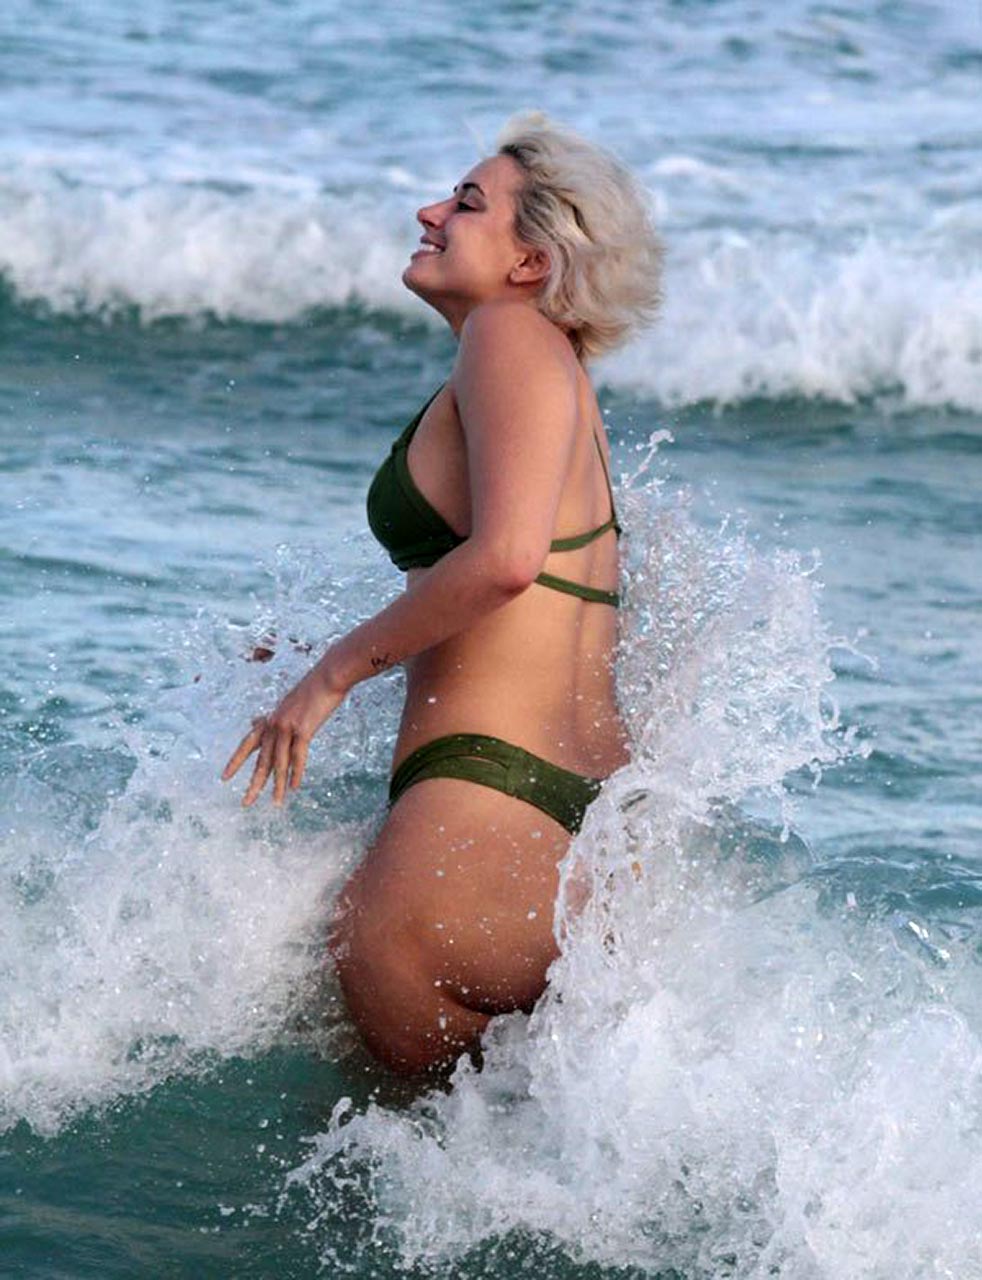 Check out the hot YesJulz nip slip that happened in Miami. 